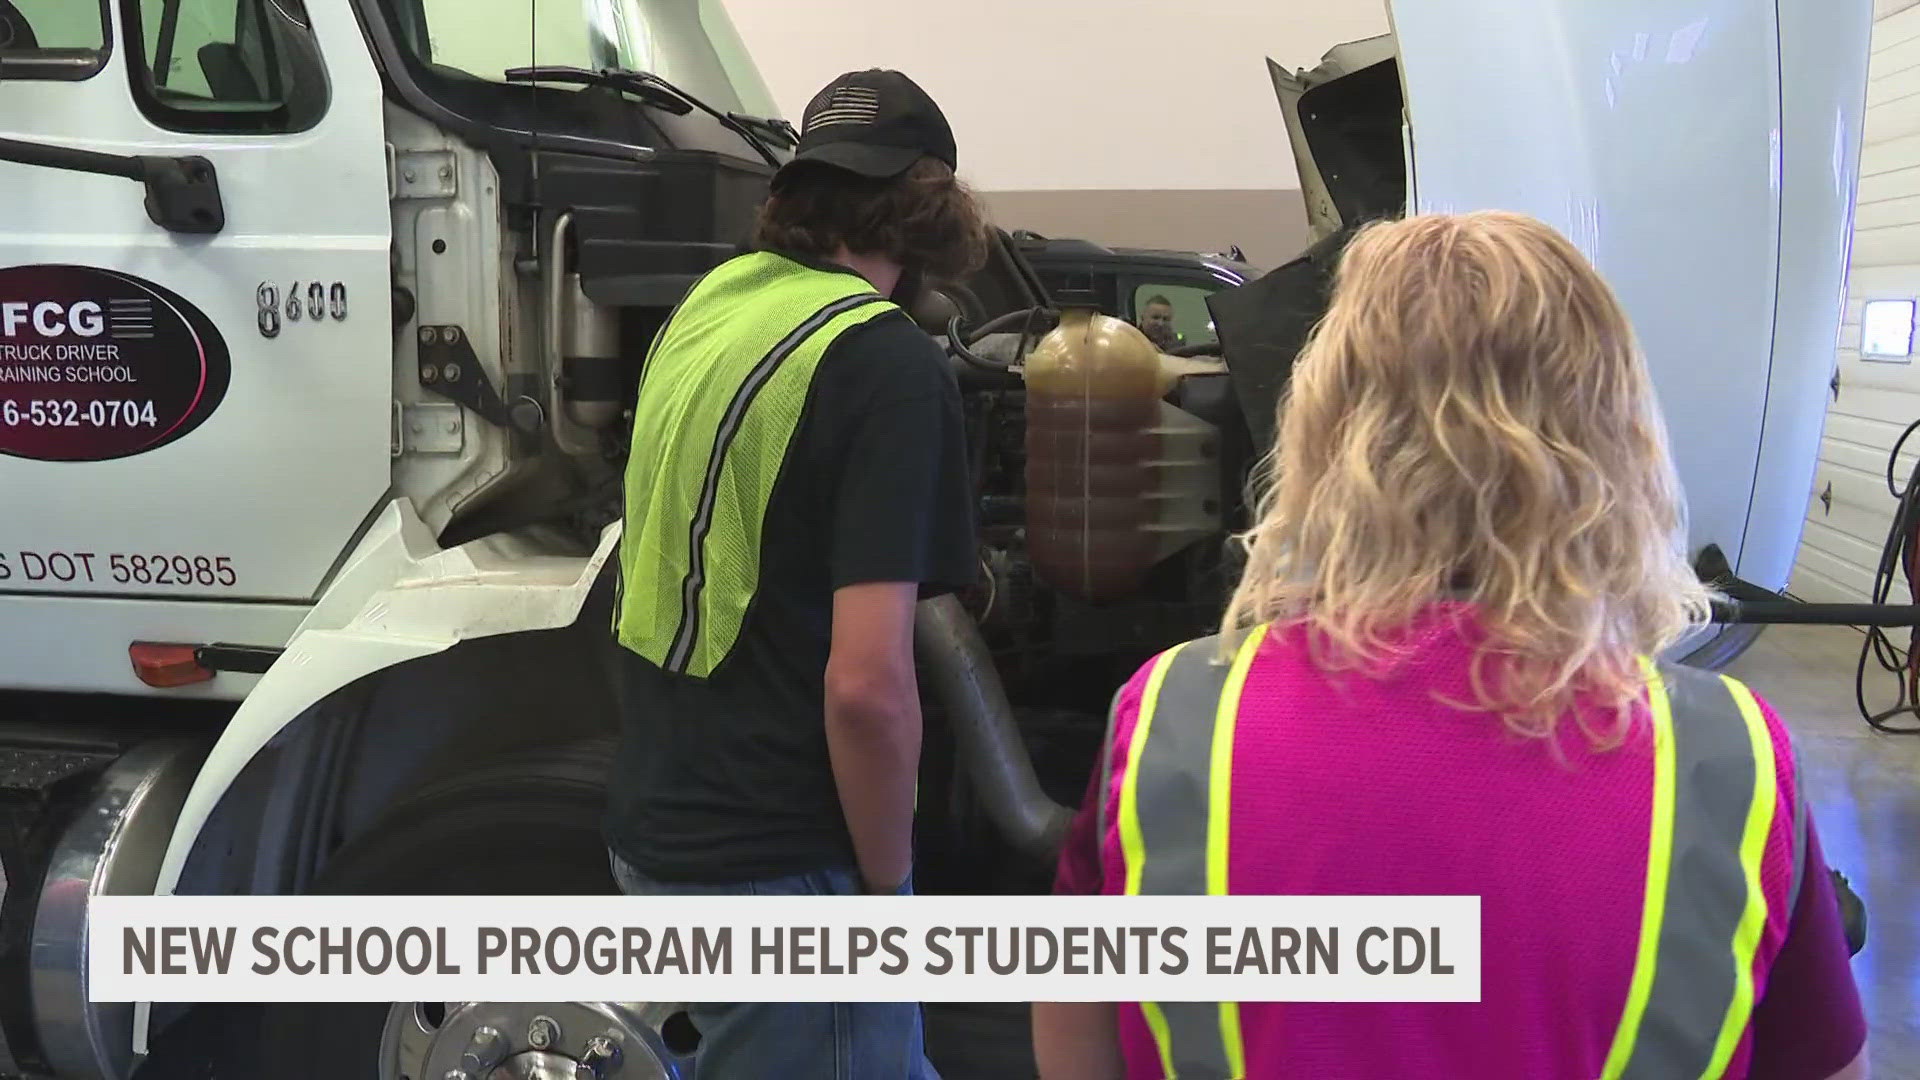 Hamilton High School students are getting help receiving their Commercial Driver's License while they're still in high school.